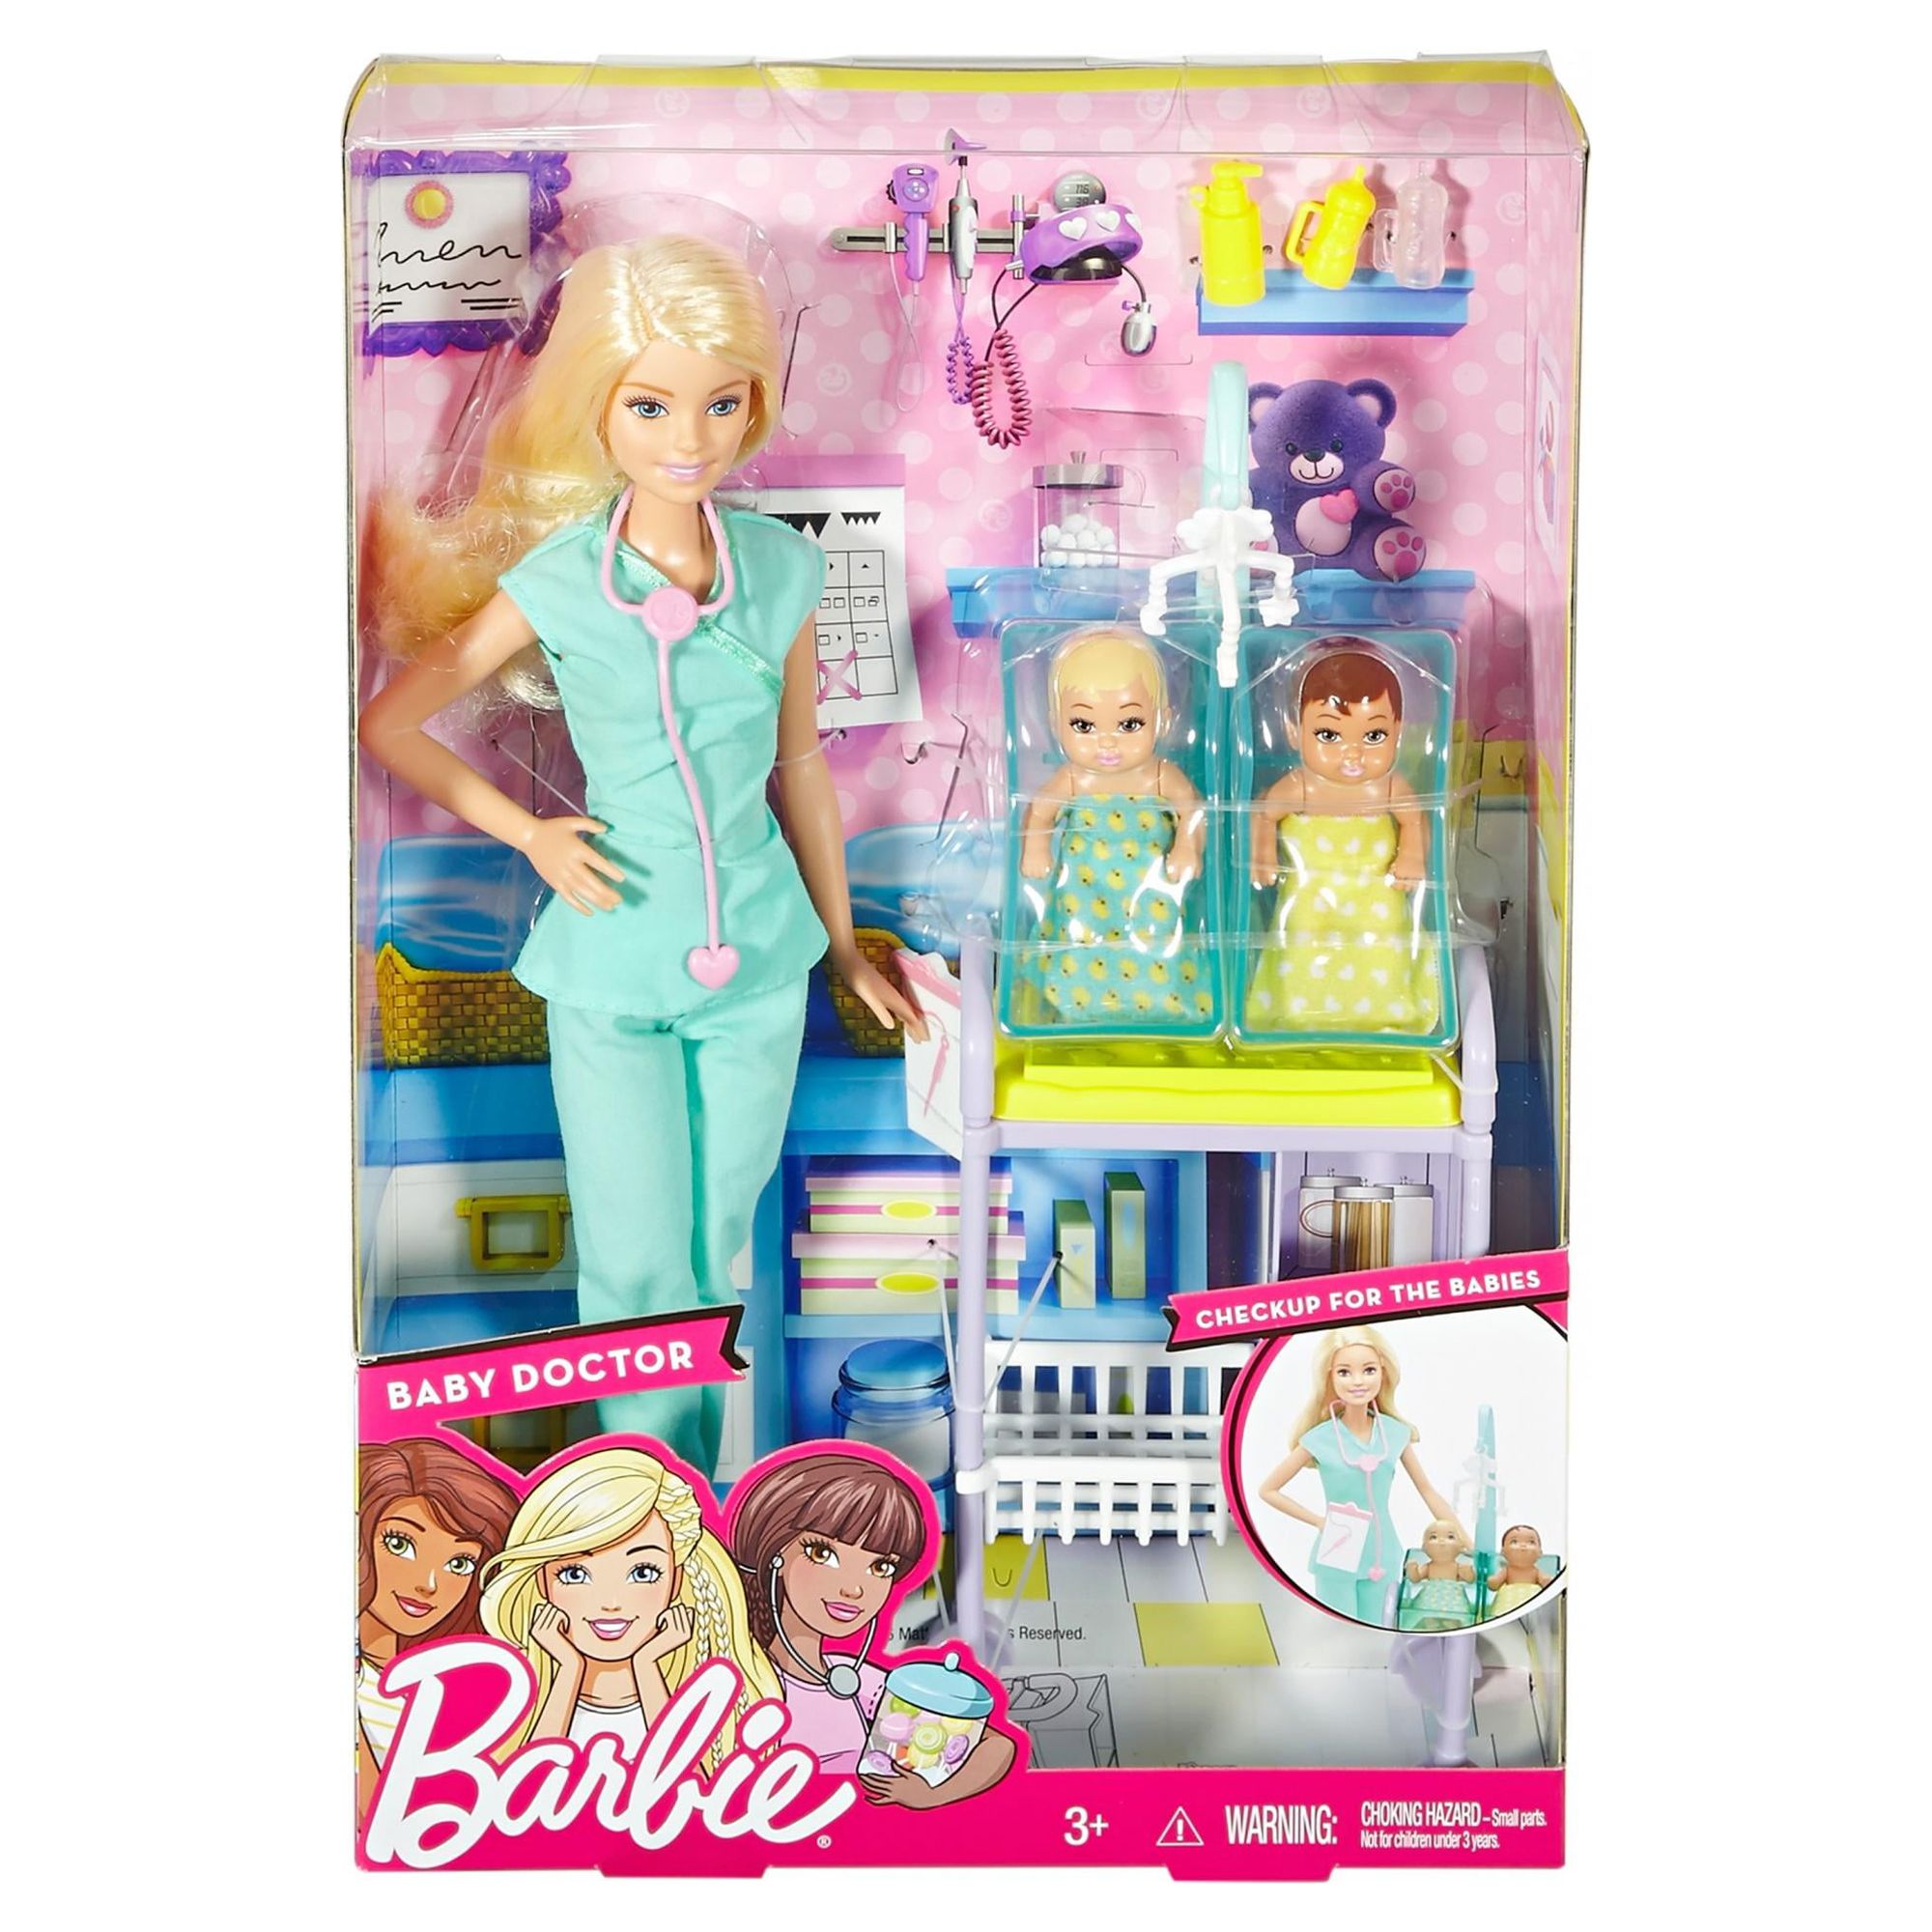 Barbie Careers Baby Doctor Barbie Doll, Blonde, with 2-Patients - image 5 of 5